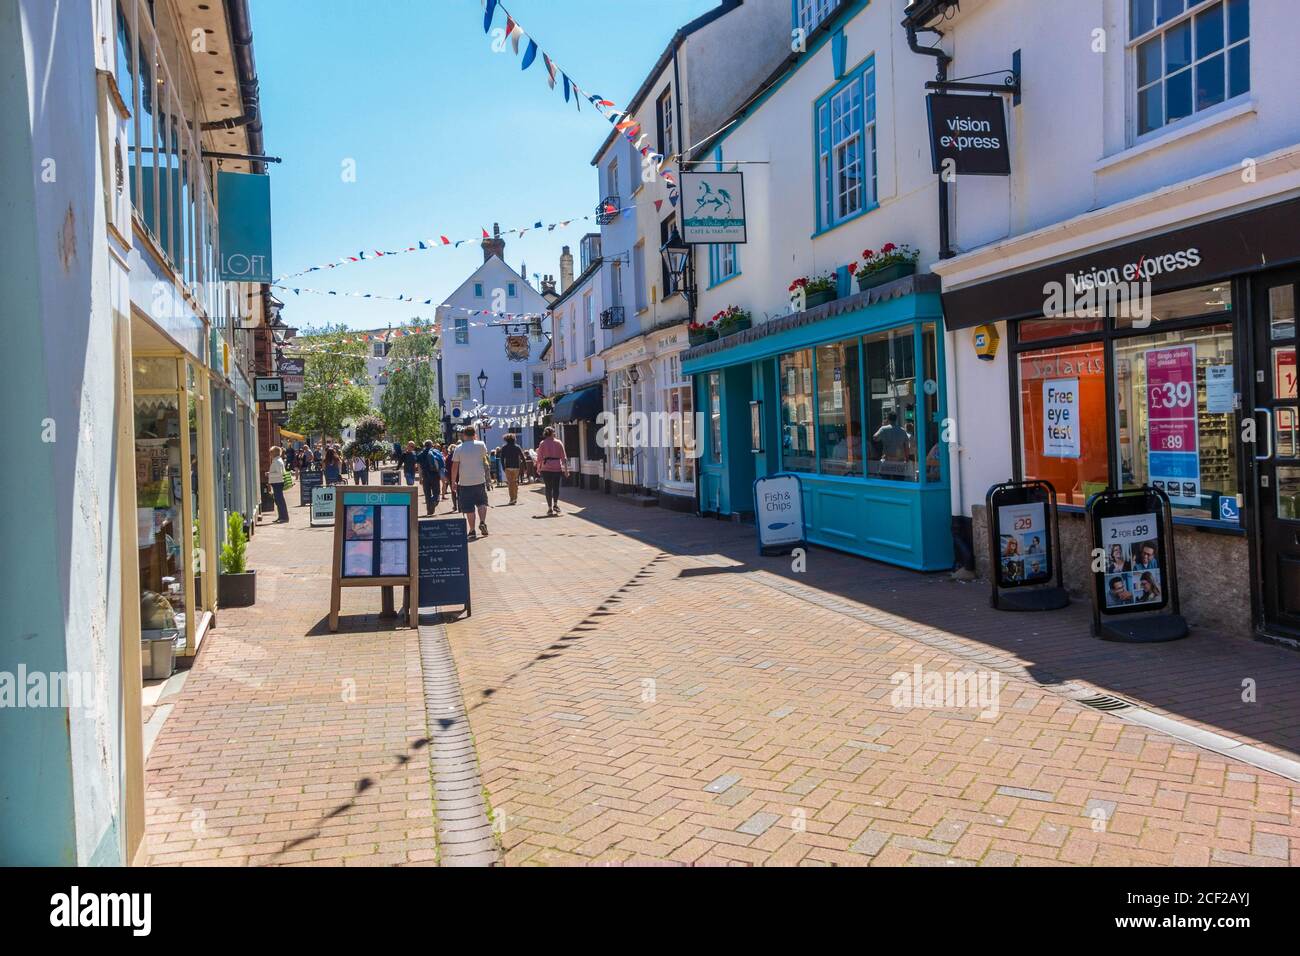 Old Fore Street in the coastal town of Sidmouth, Devon UK. June 2019. Stock Photo